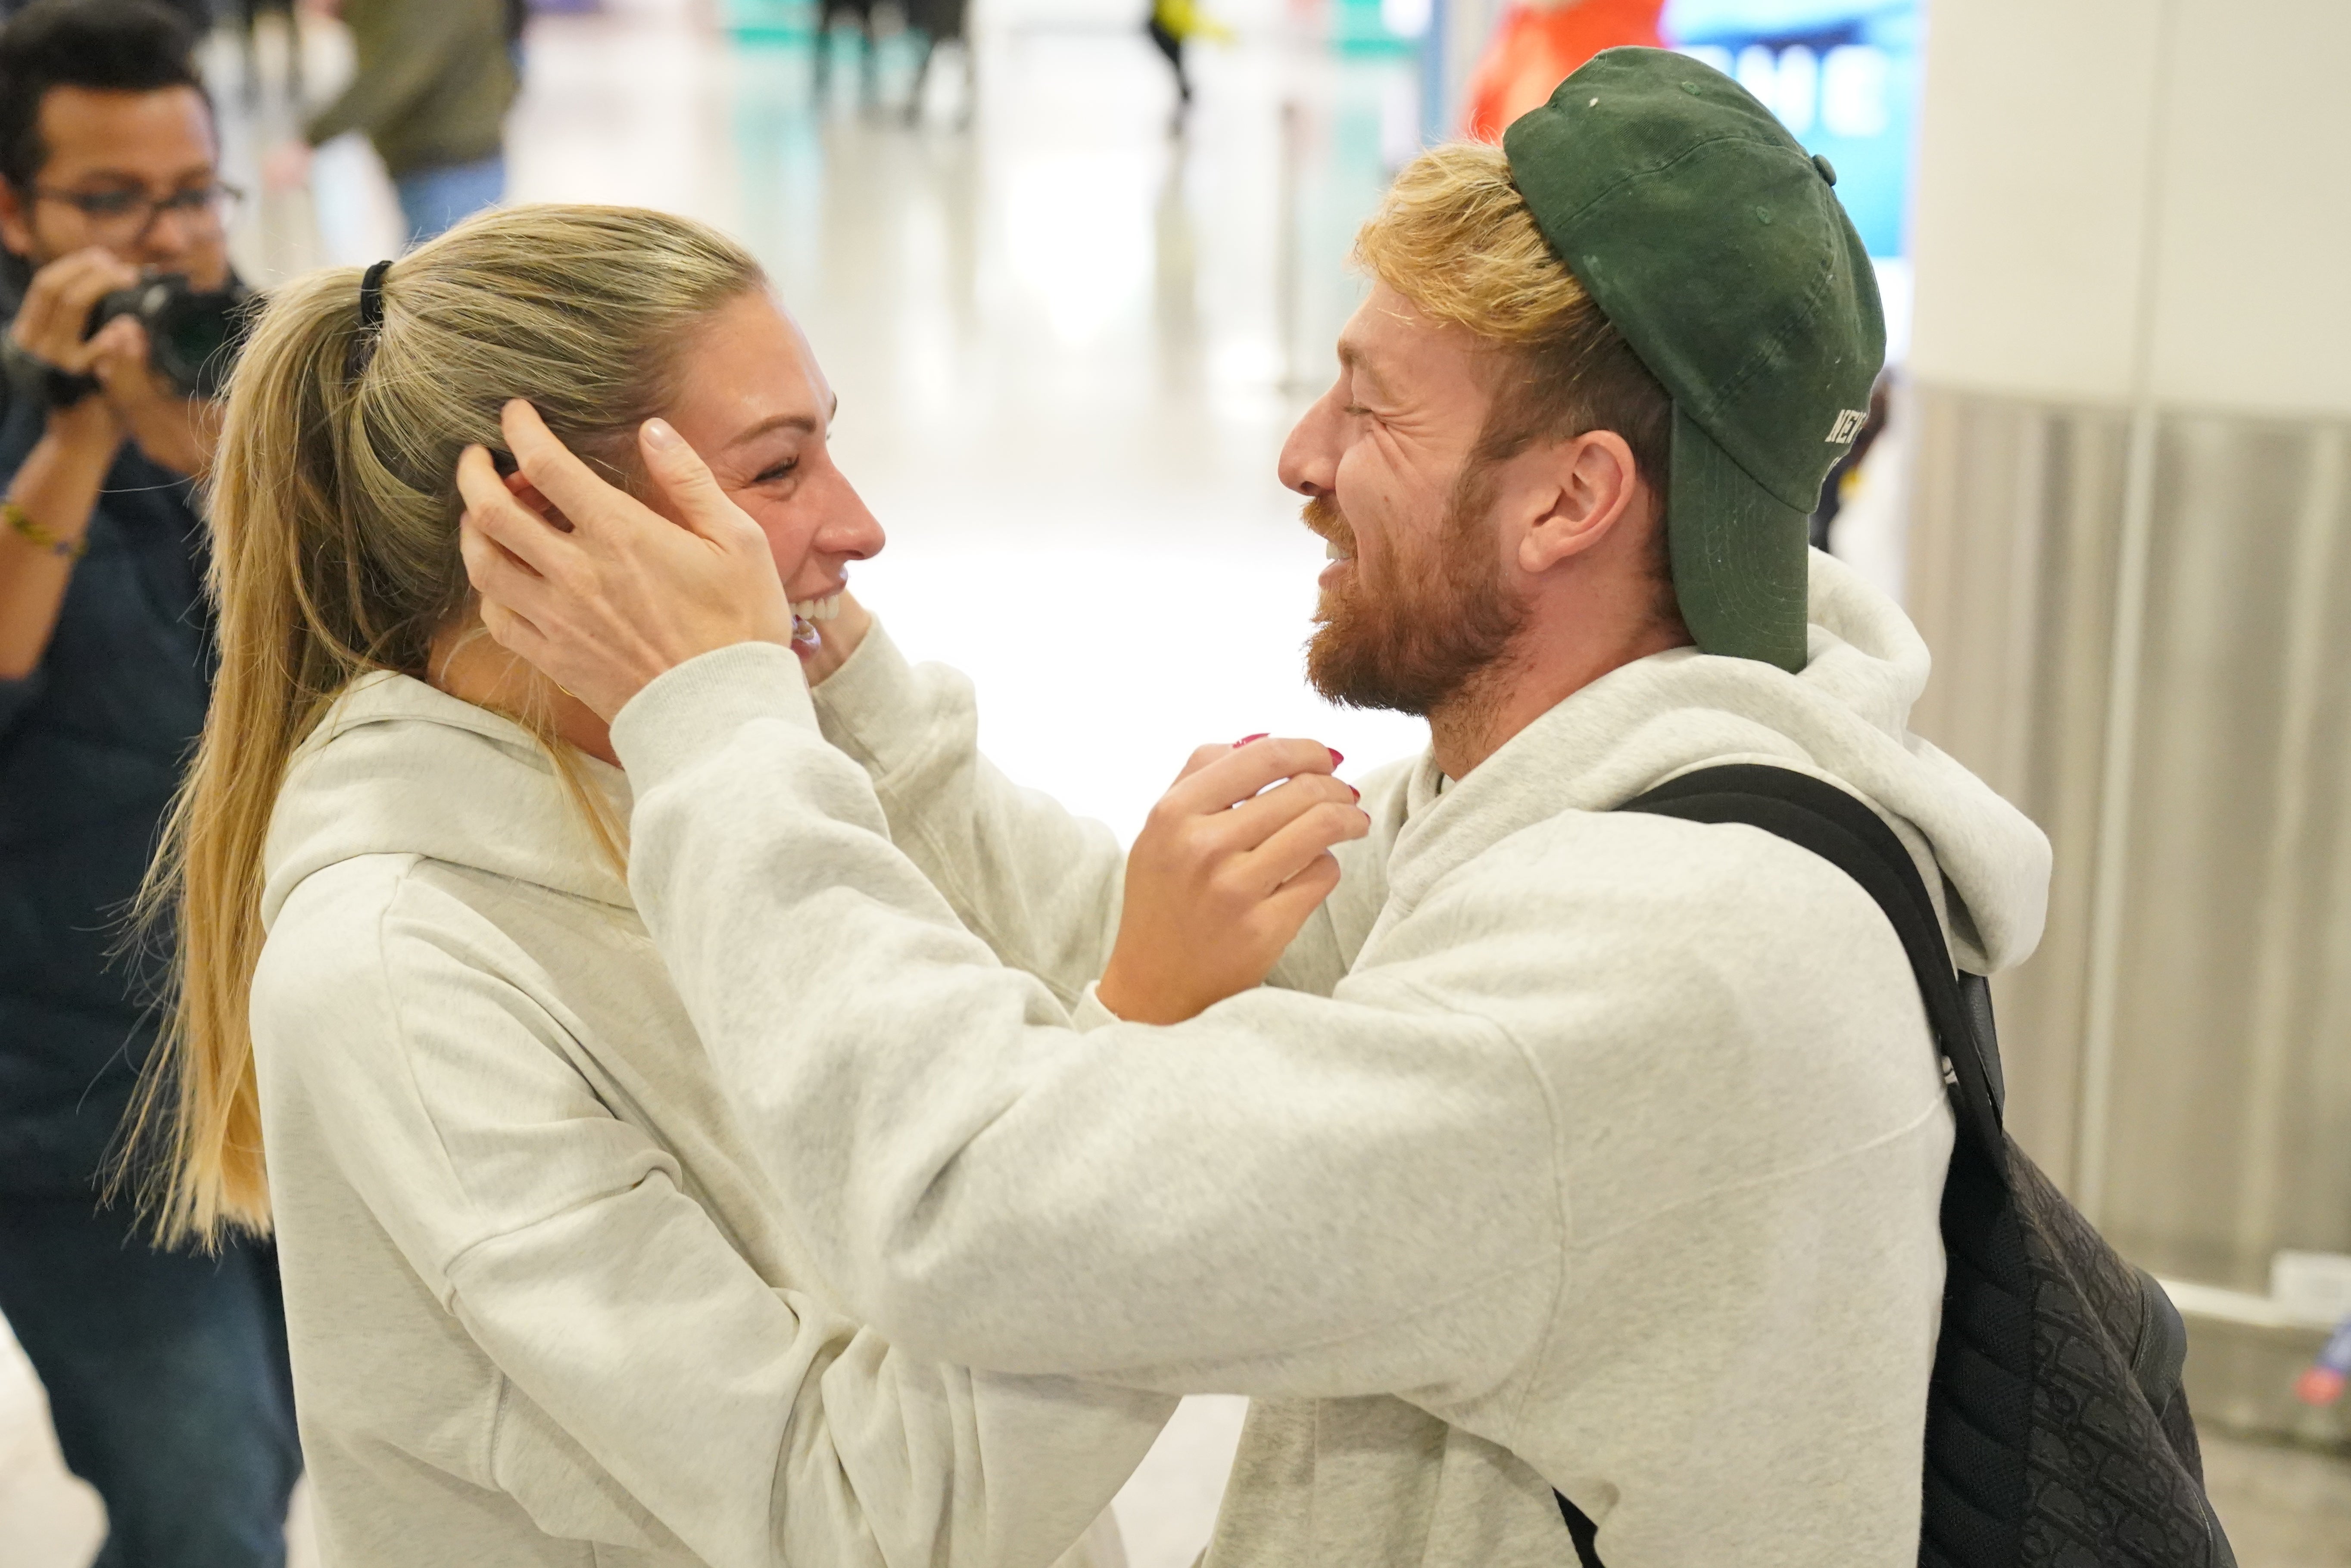 Sam Thompson greeted by Zara McDermott as he arrives in London after I'm a Celeb victory